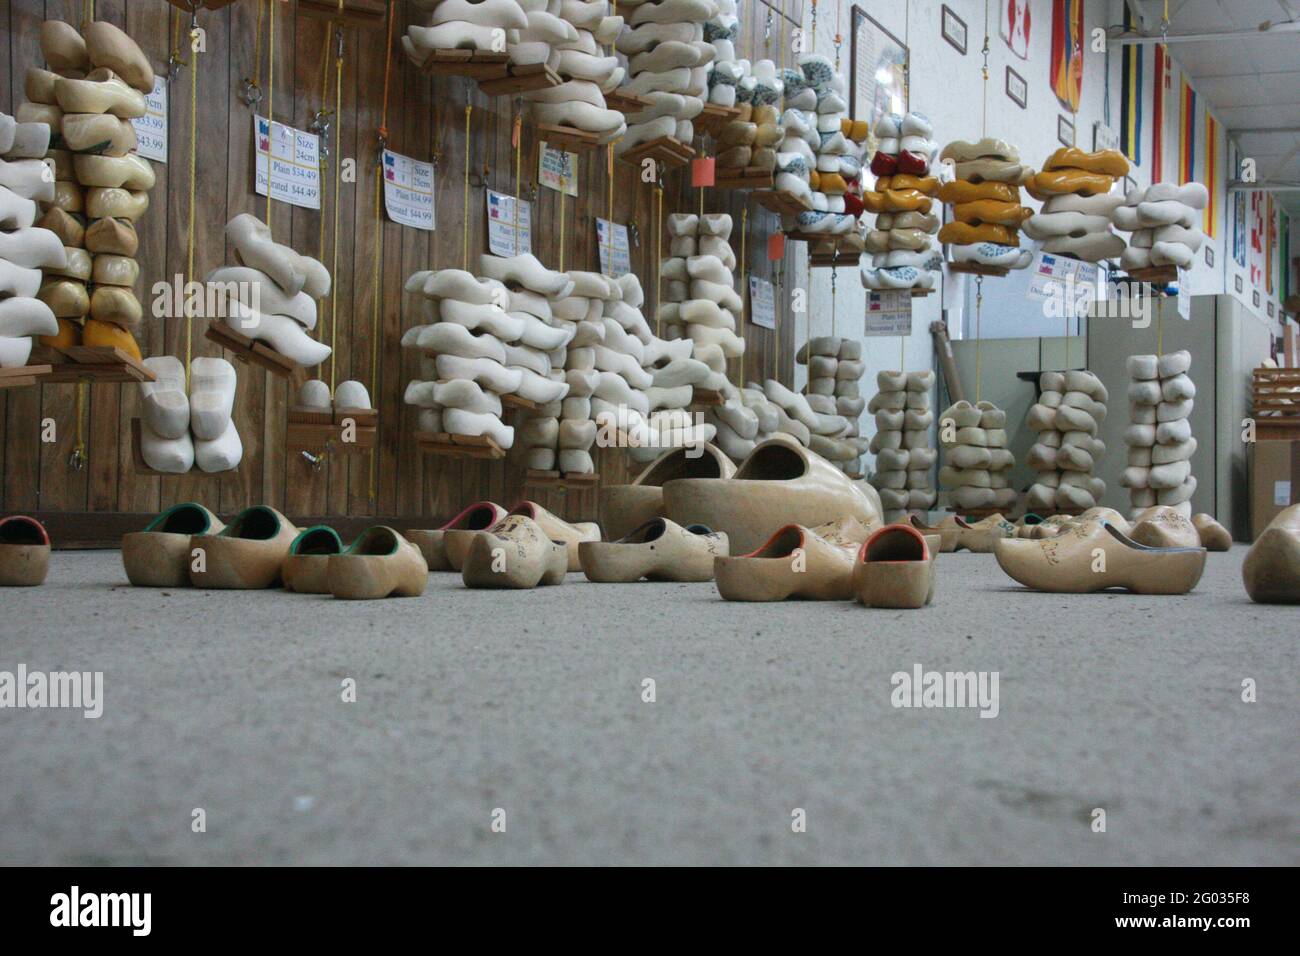 Holland, MI, USA. Traditional Dutch wooden shoes for sale at the De Klomp Wooden Shoe and Delft Factory. Stock Photo